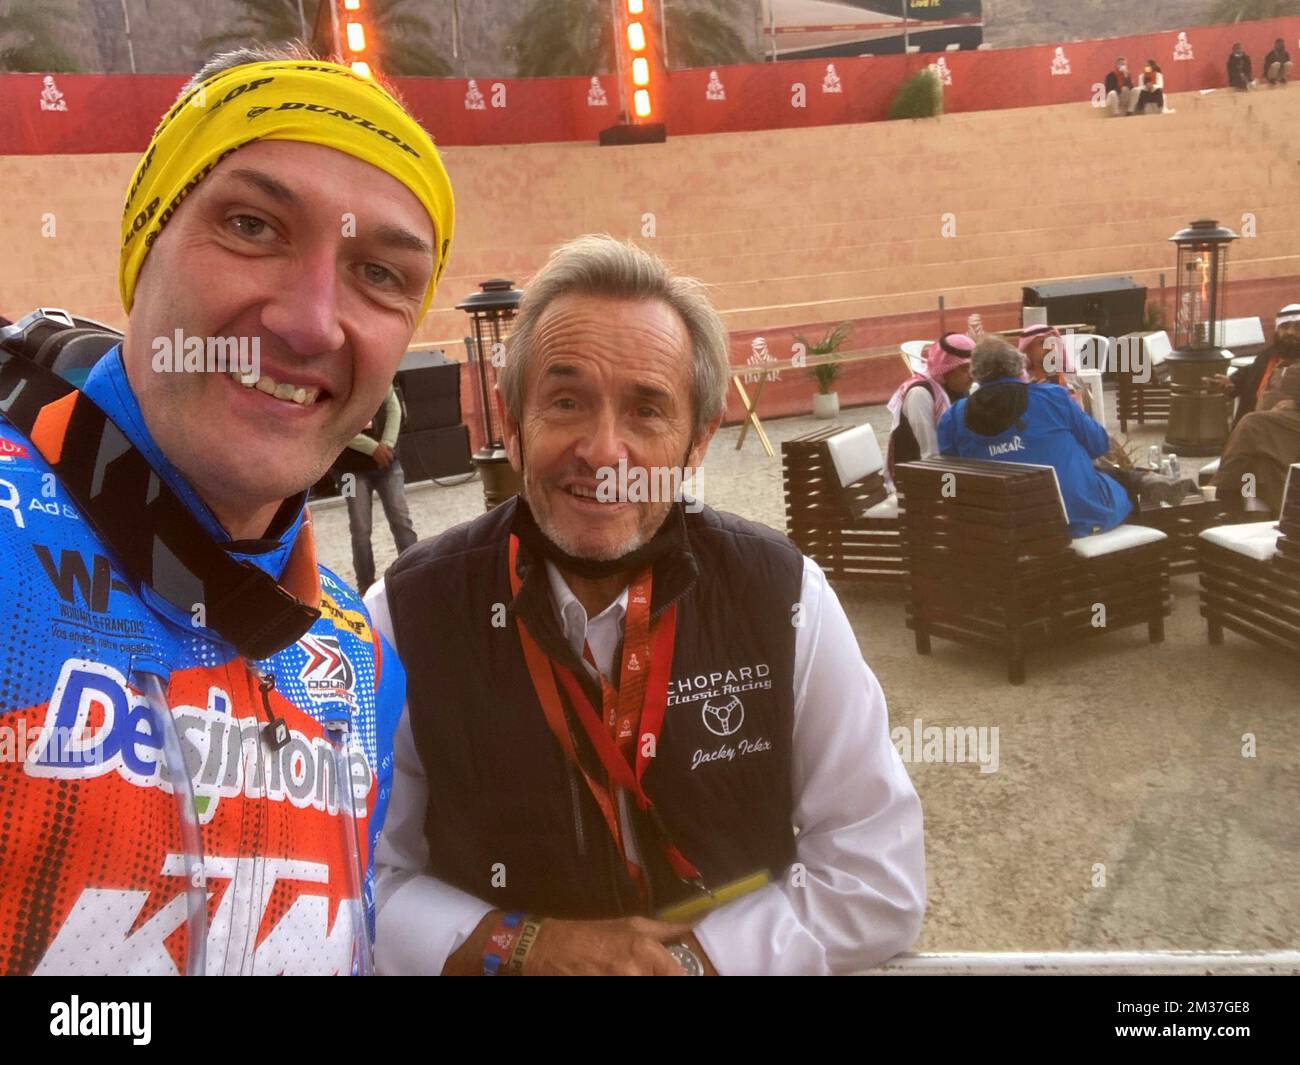 Belgian motor rider Mikael Despontin and Belgian racing legend Jacky Ickx pose for a selfie picture, as Ickx celebrates his 77th birthday, at the prologue of the 2022 Dakar Rally in Ha'll, in Saudi Arabia, Saturday 01 January 2022. The 2022 Dakar Rally, the 44th edition of the race, takes place in Saudi Arabia, from 01 to 14 January 2022. BELGA PHOTO MIKAEL DESPONTIN / ERIC DUPAIN  Stock Photo